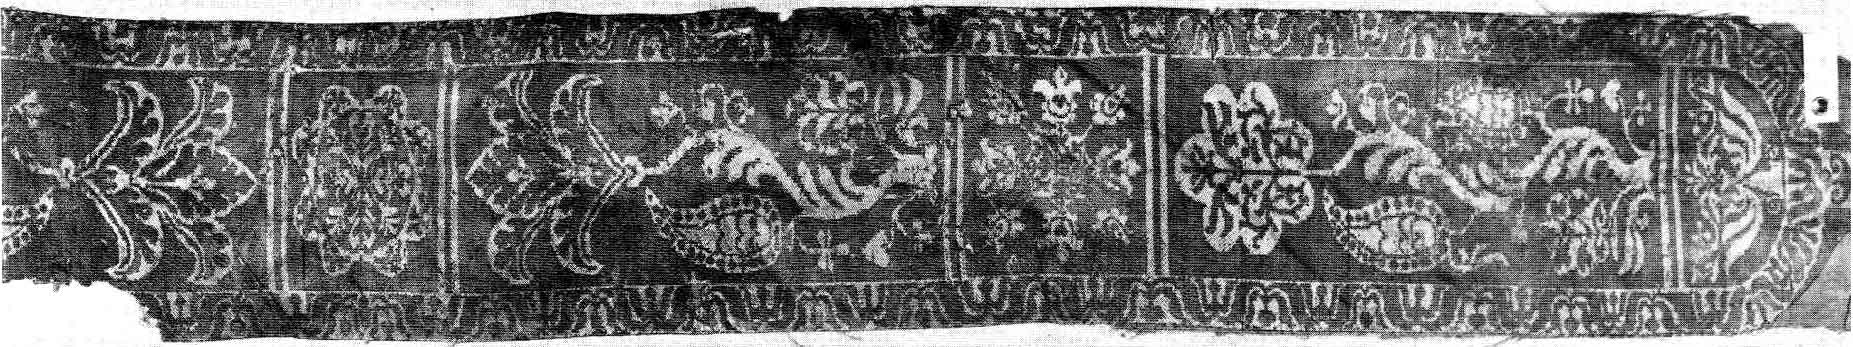 Silk panel from Akhmim also dated to 7-8th cent. CE